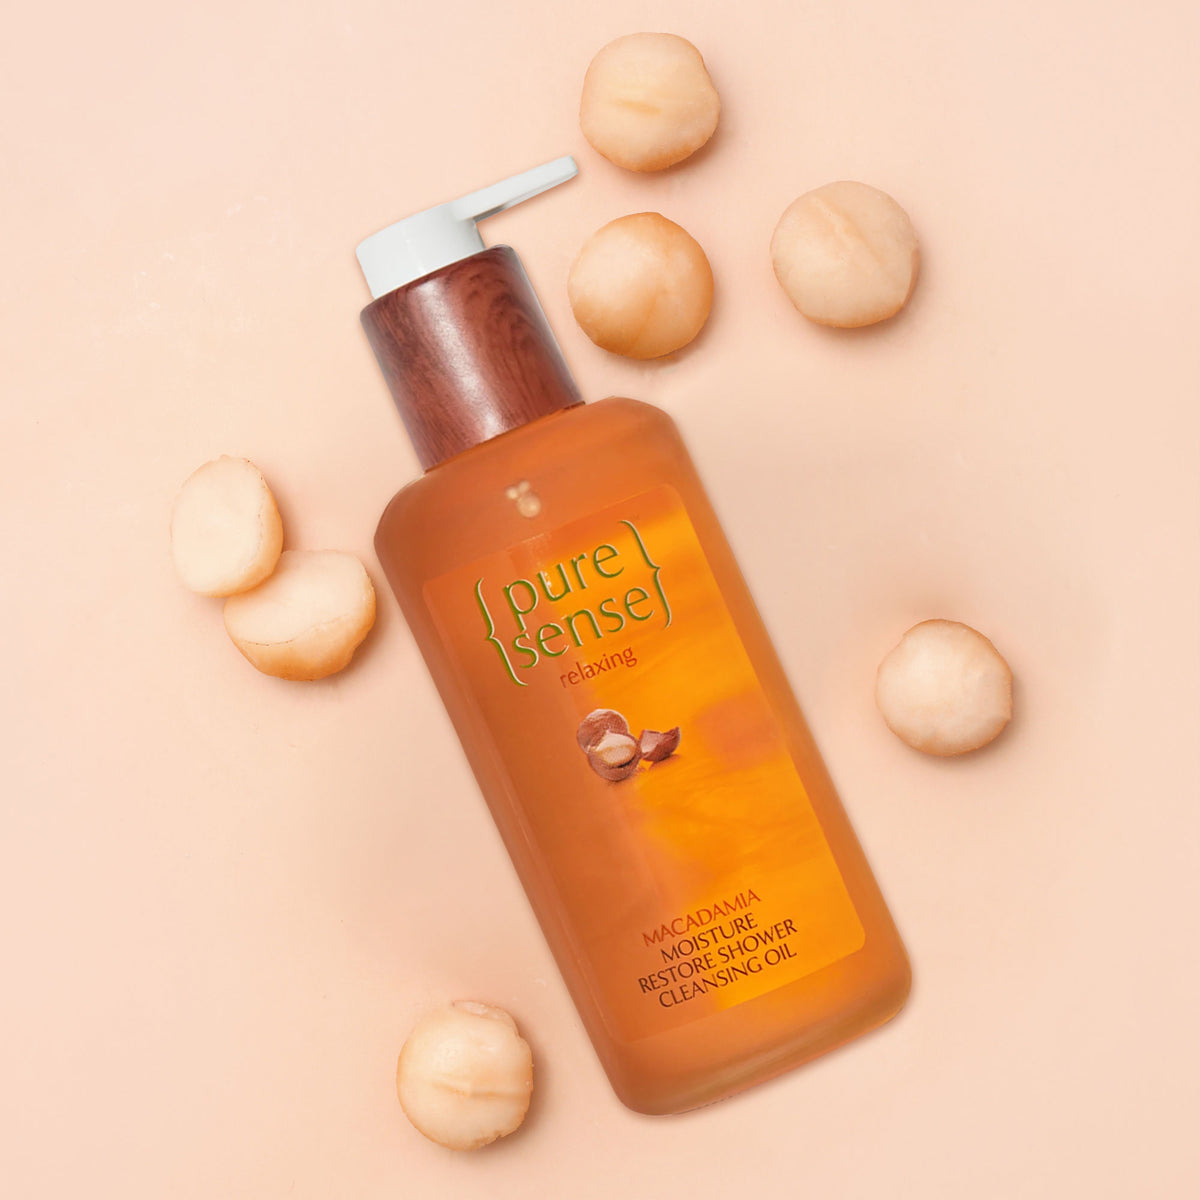 Macadamia Moisture Restore Shower Cleansing Oil (Body Wash) | From the makers of Parachute Advansed | 200ml - PureSense